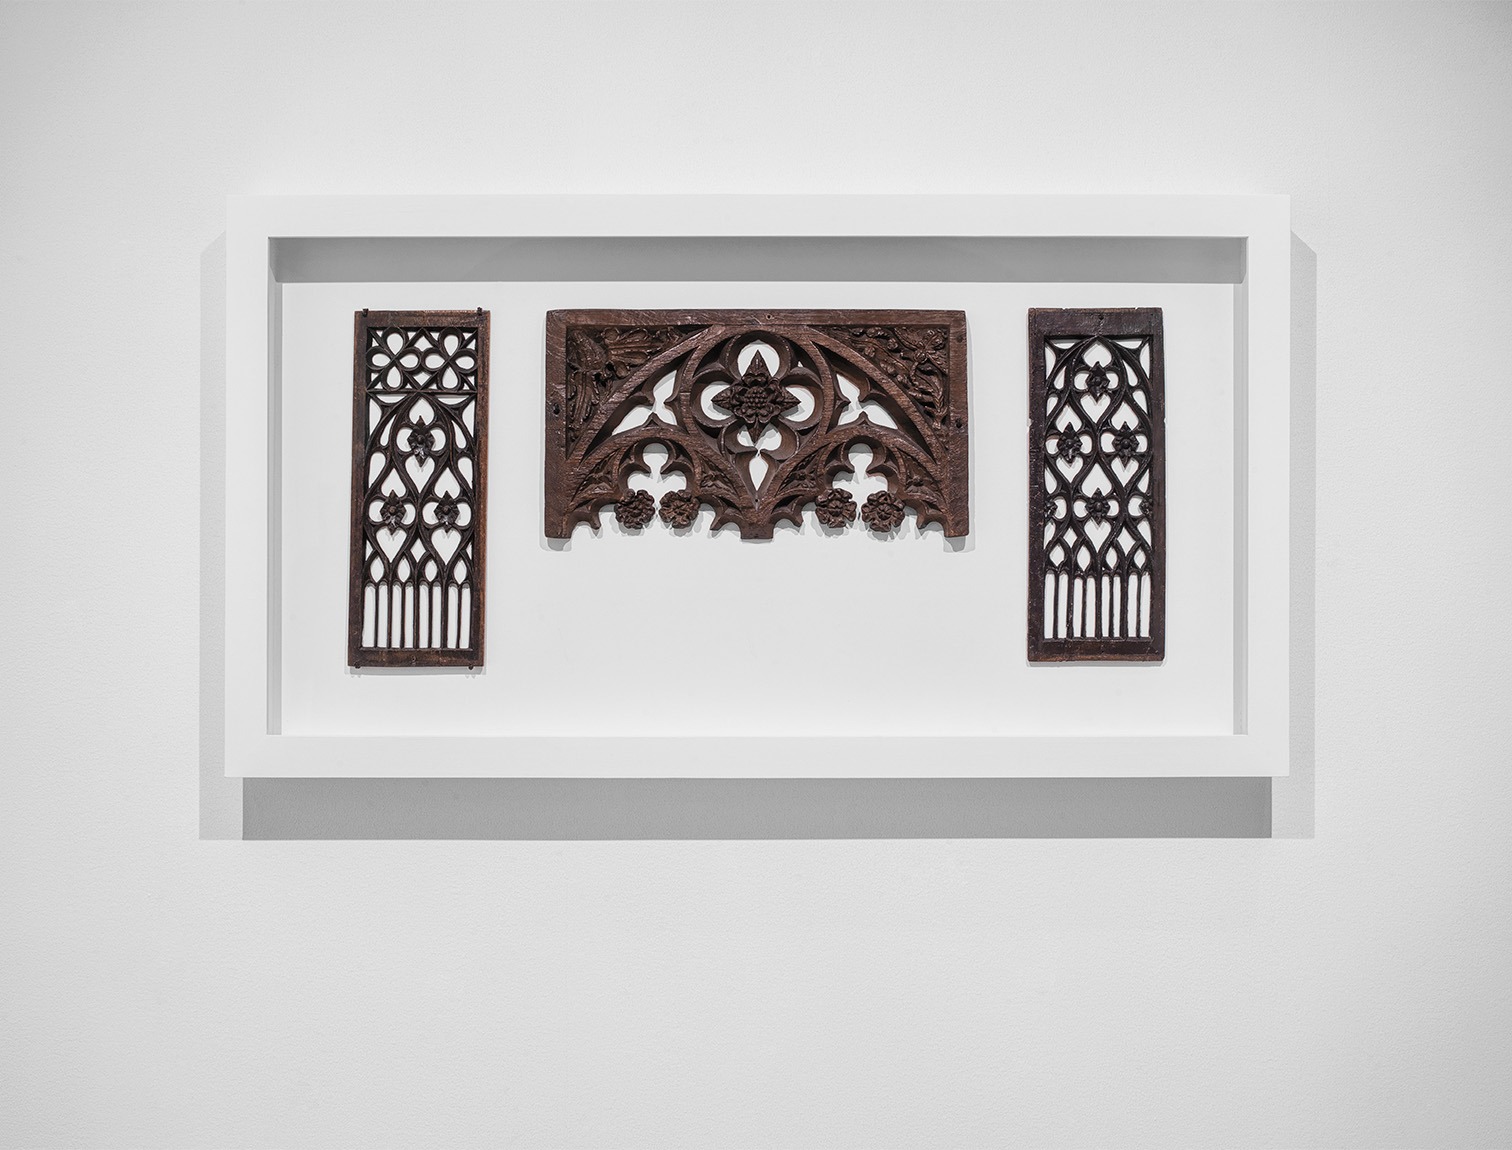 Two decorative wooden panels with a wooden arch in the middle. Works from the middle ages on view at the Pulitzer Arts Foundation.